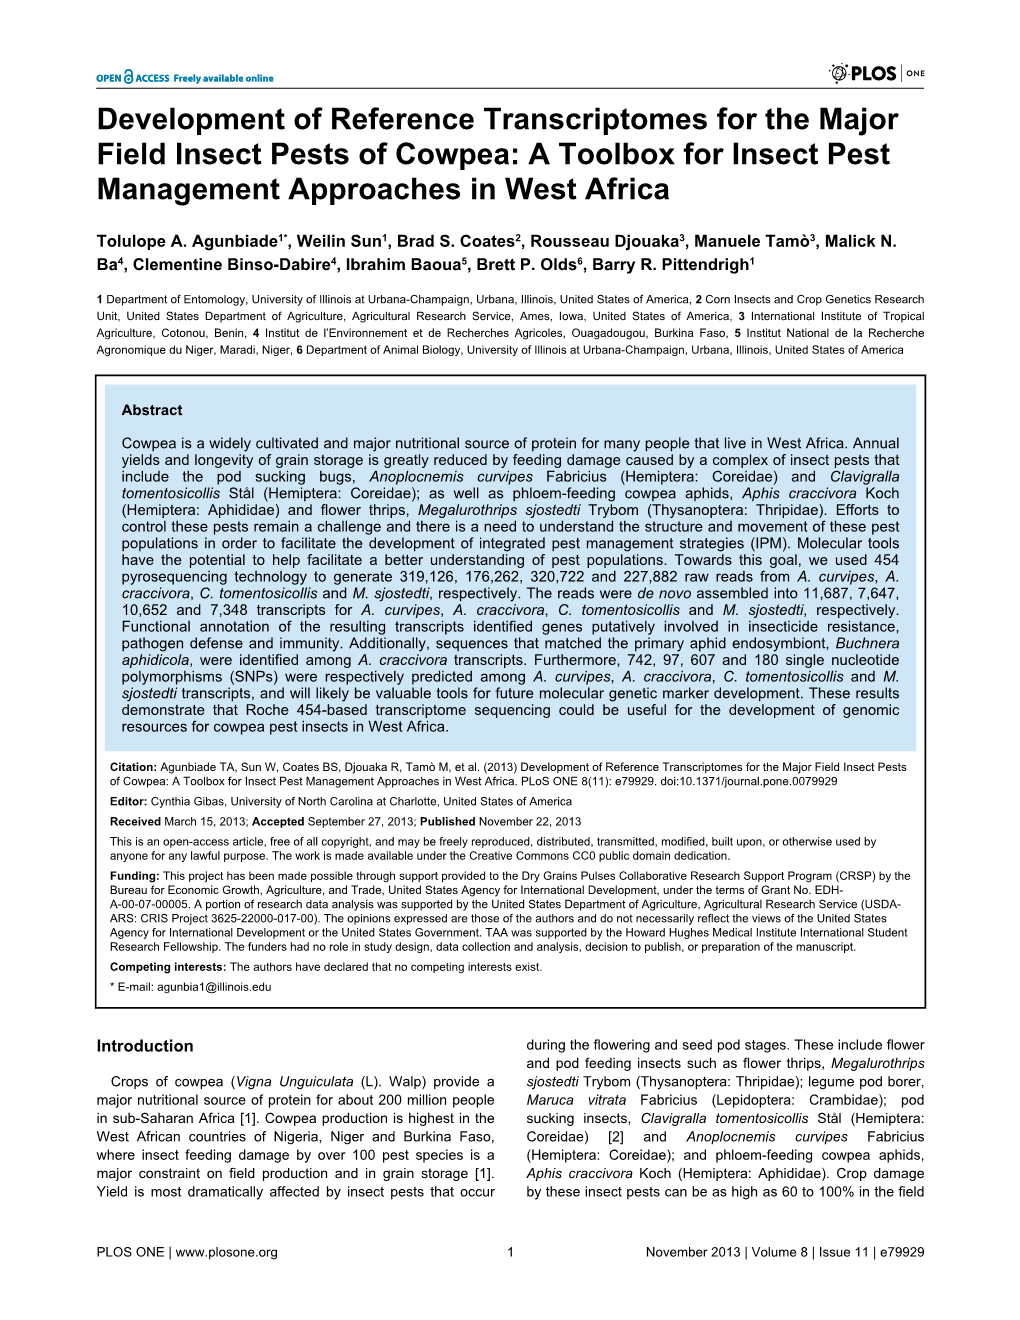 Development of Reference Transcriptomes for the Major Field Insect Pests of Cowpea: a Toolbox for Insect Pest Management Approaches in West Africa